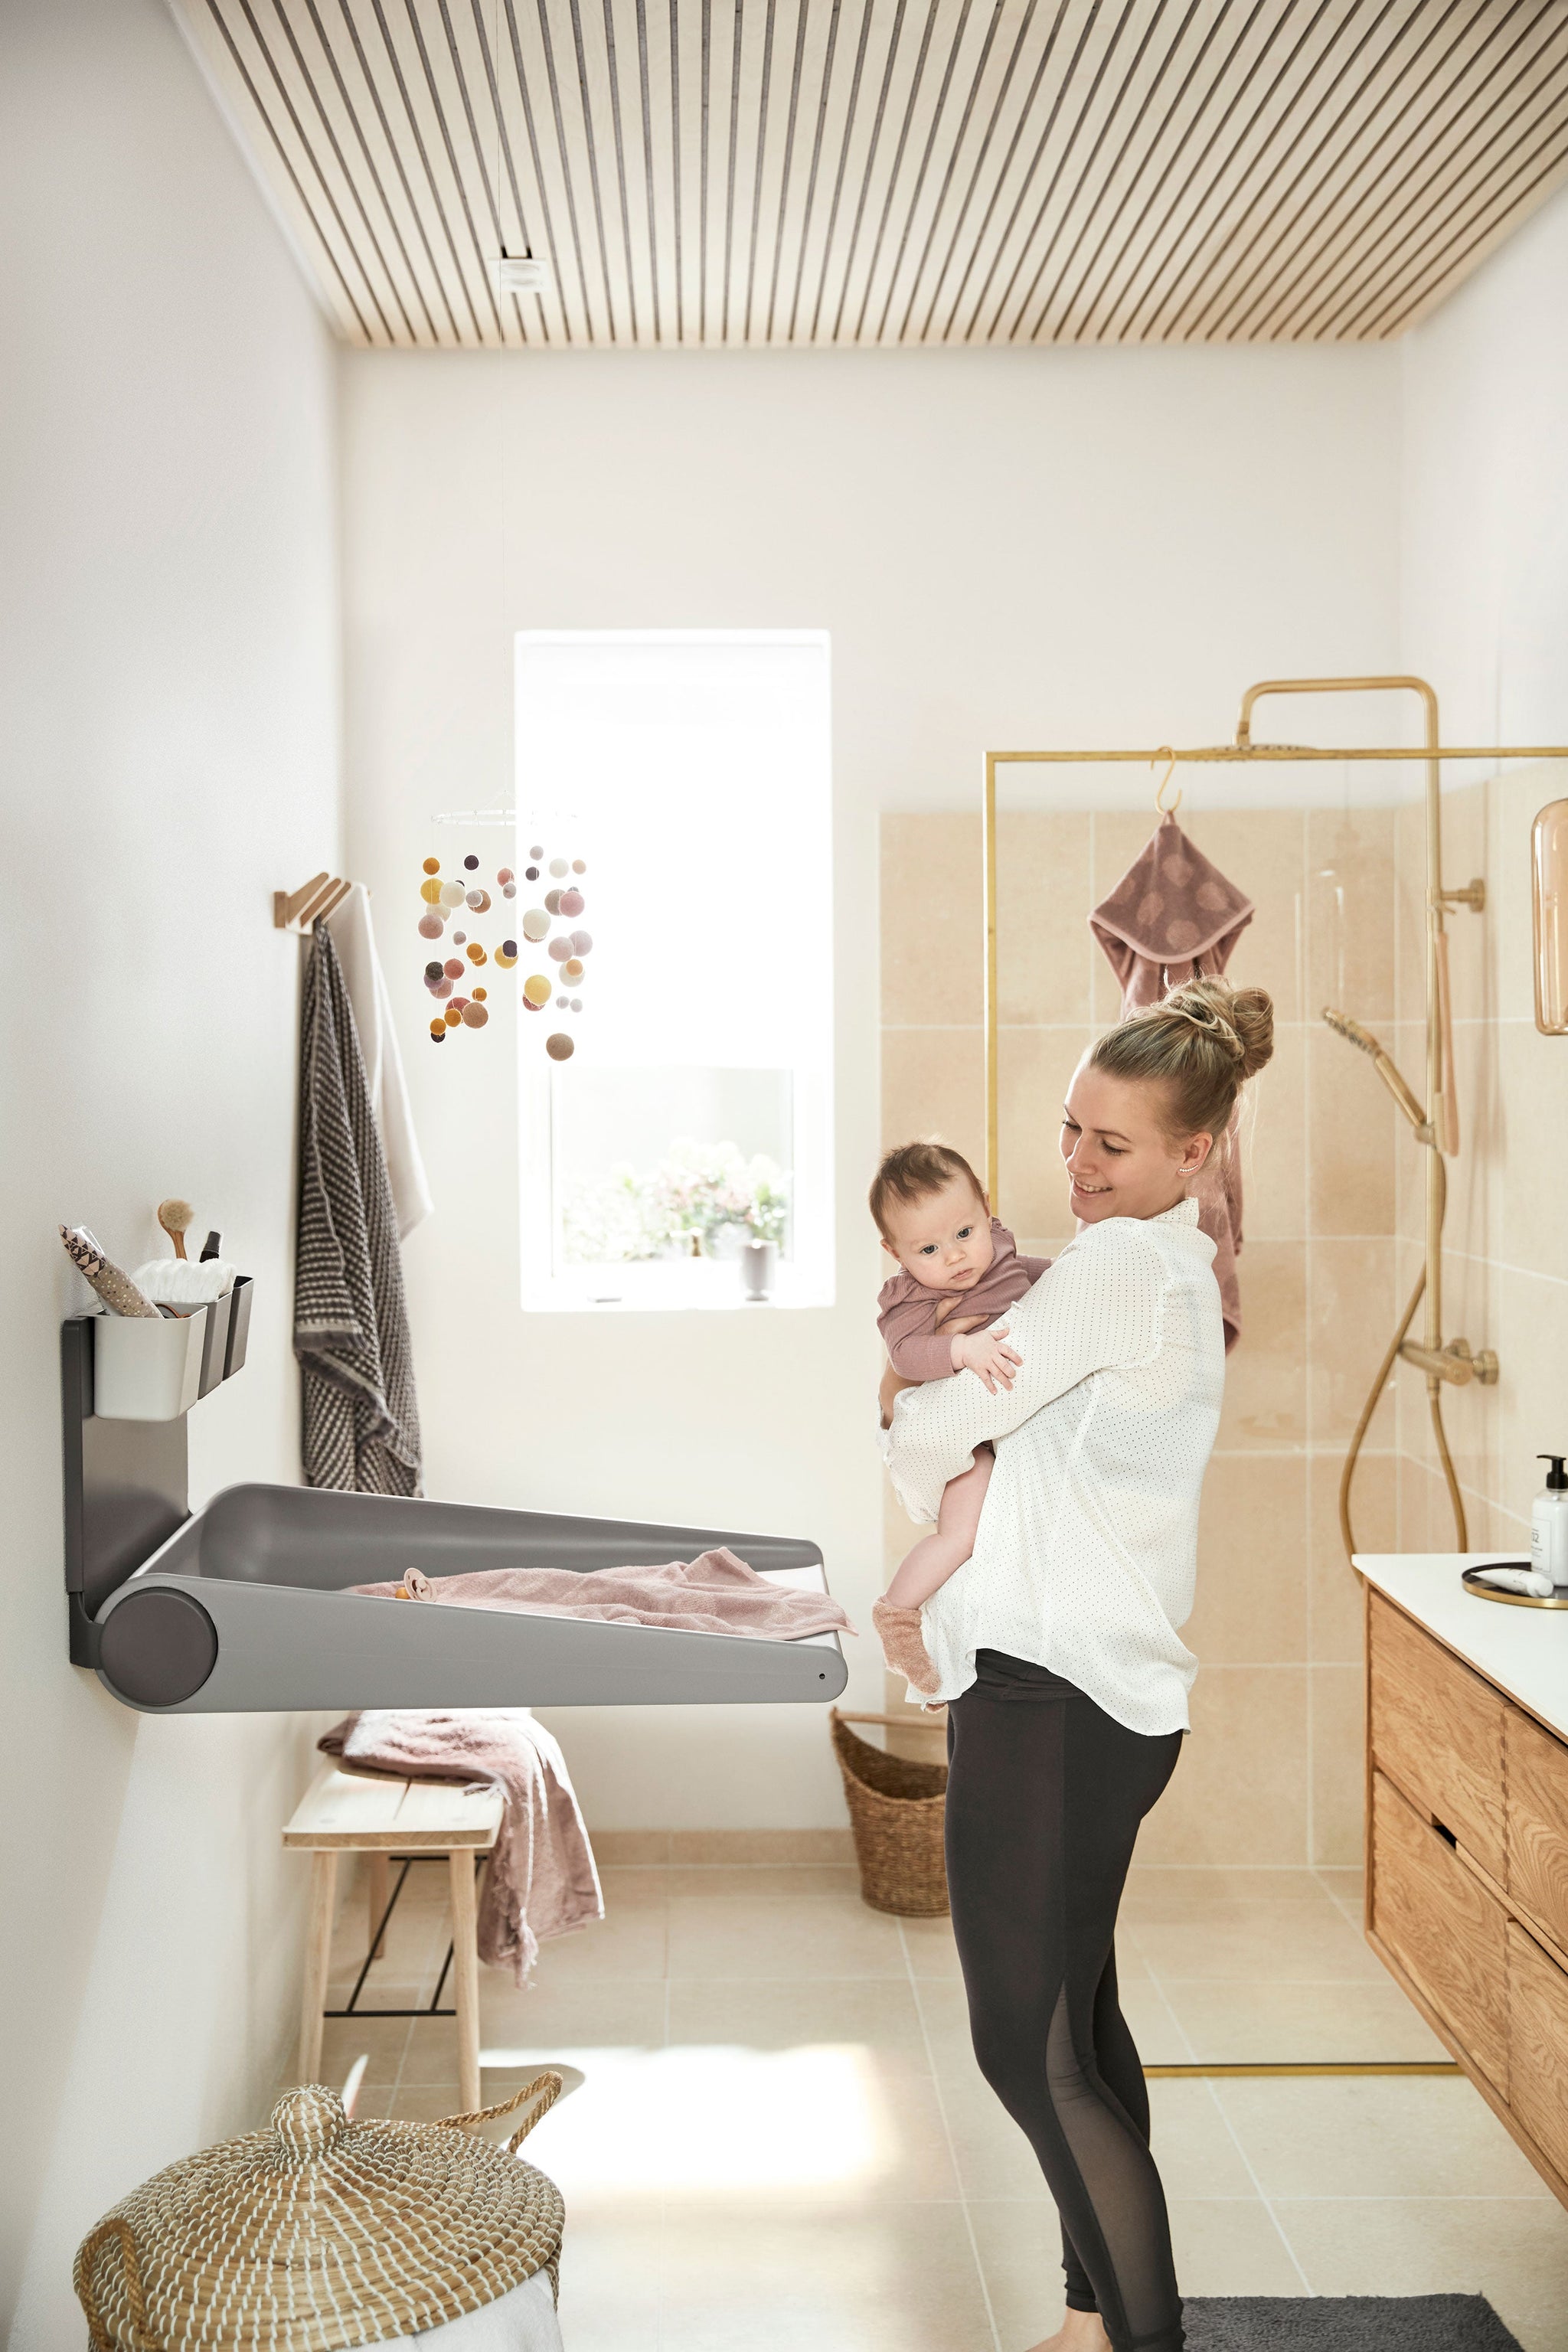 Wally Wallmounted Changing Table Dusty Grey - Leander